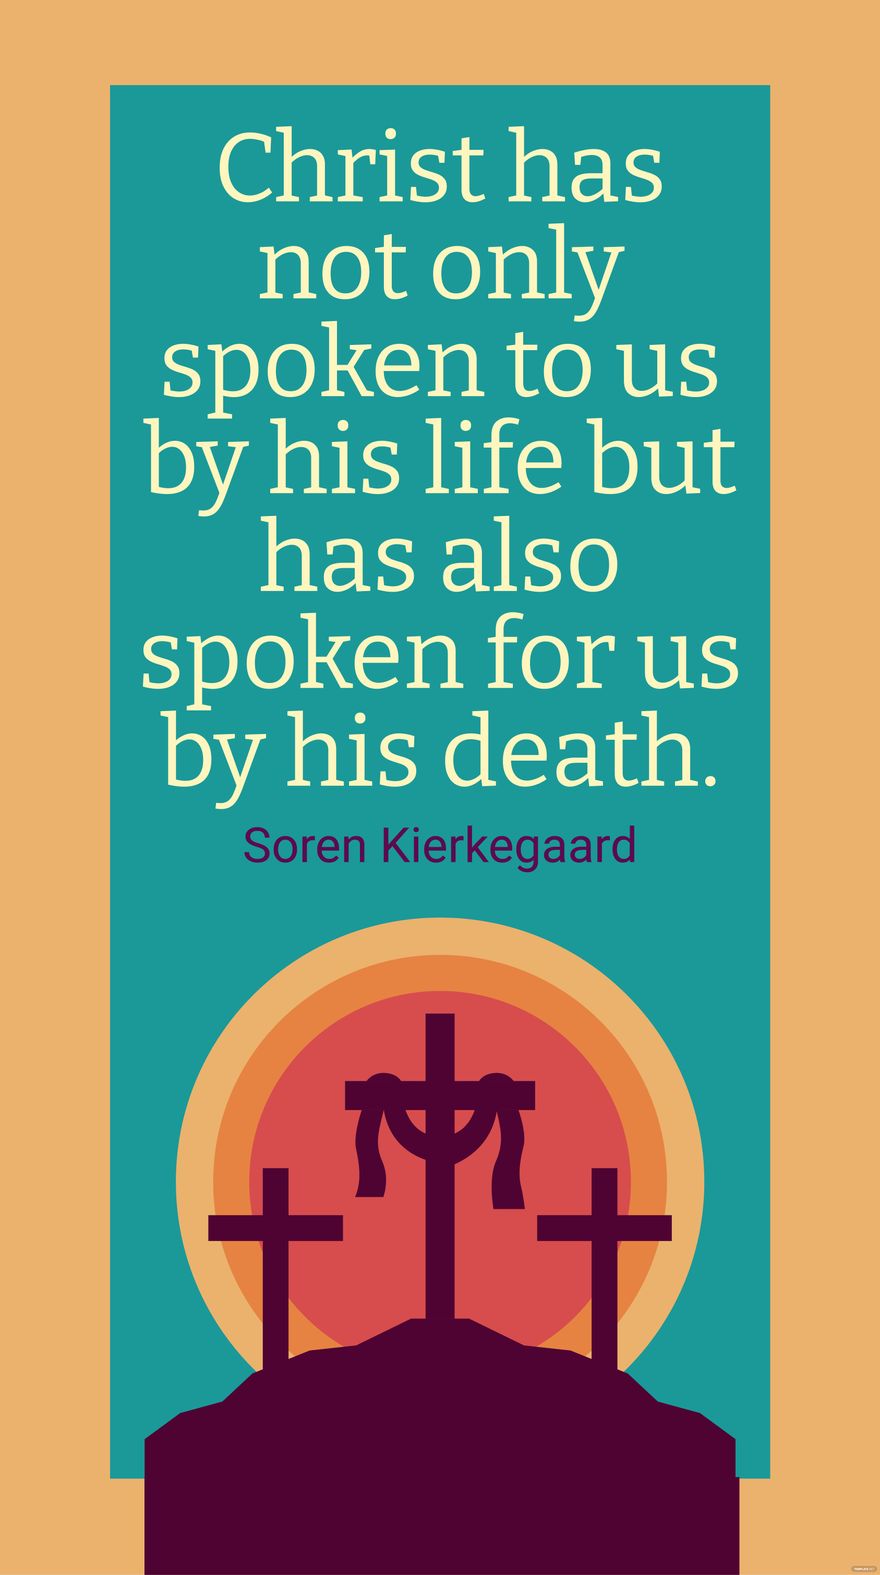 Soren Kierkegaard - Christ has not only spoken to us by his life but has also spoken for us by his death.